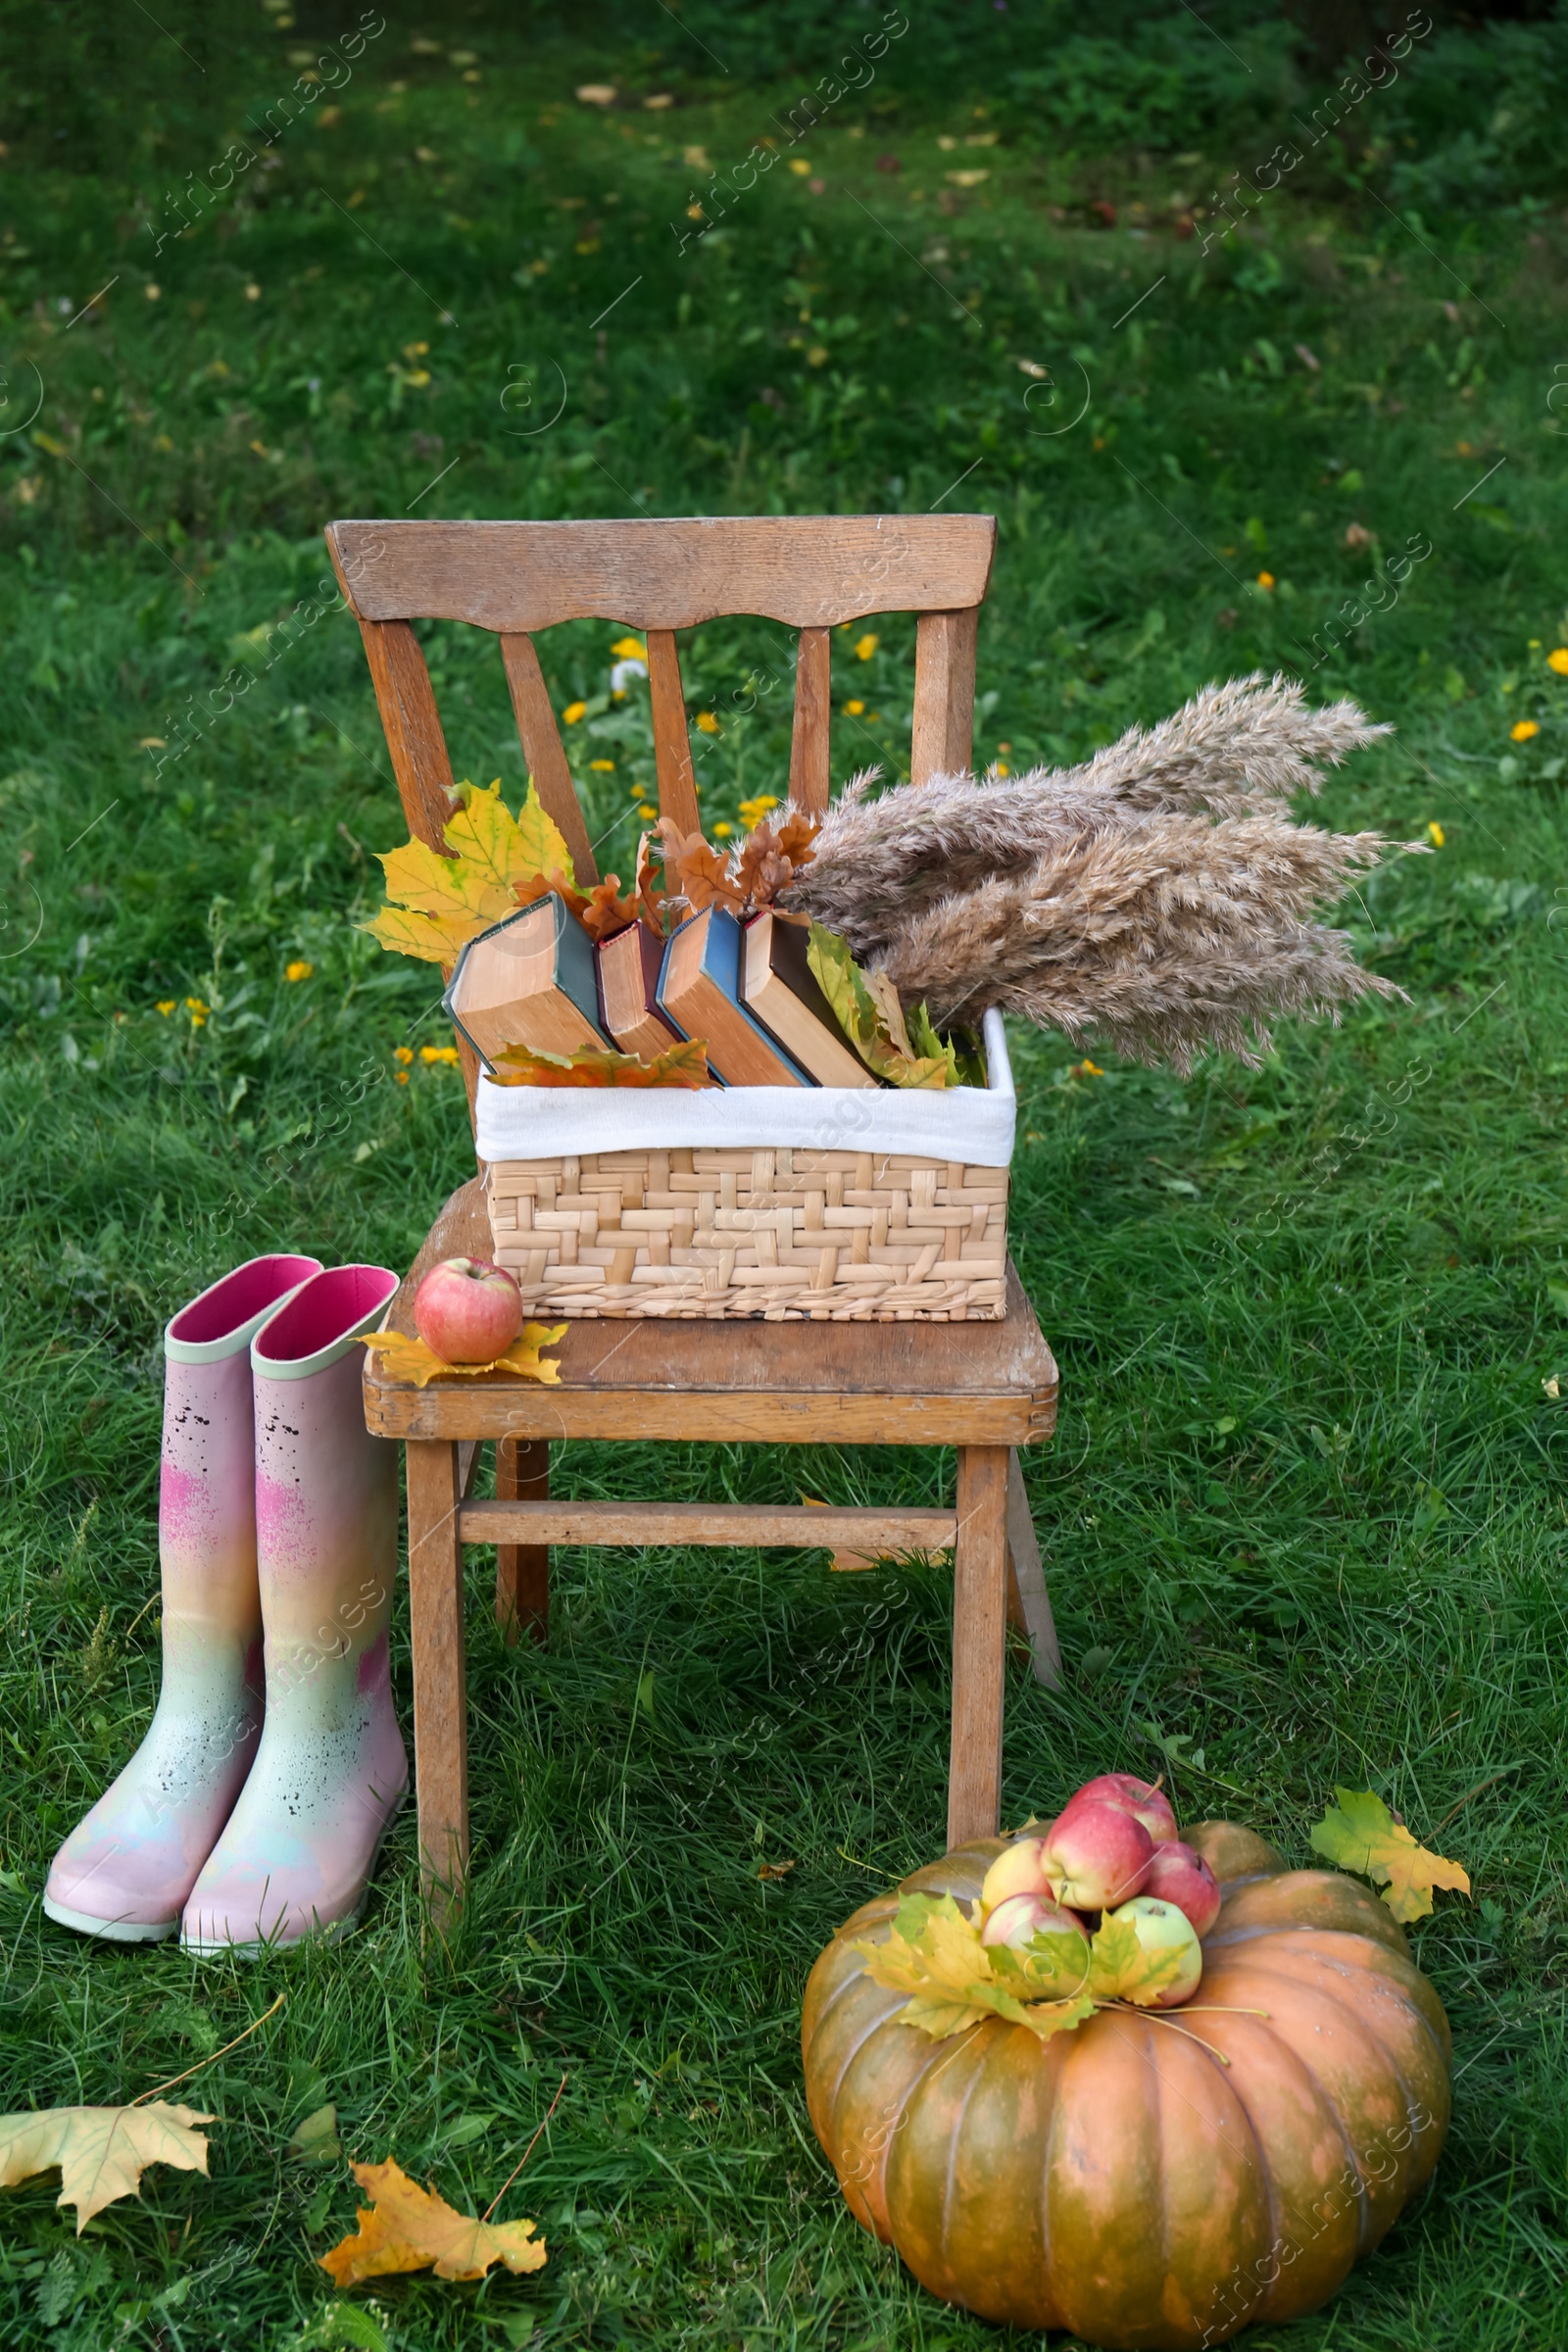 Photo of Rubber boots, chair, pumpkin and apples on green grass outdoors. Autumn atmosphere